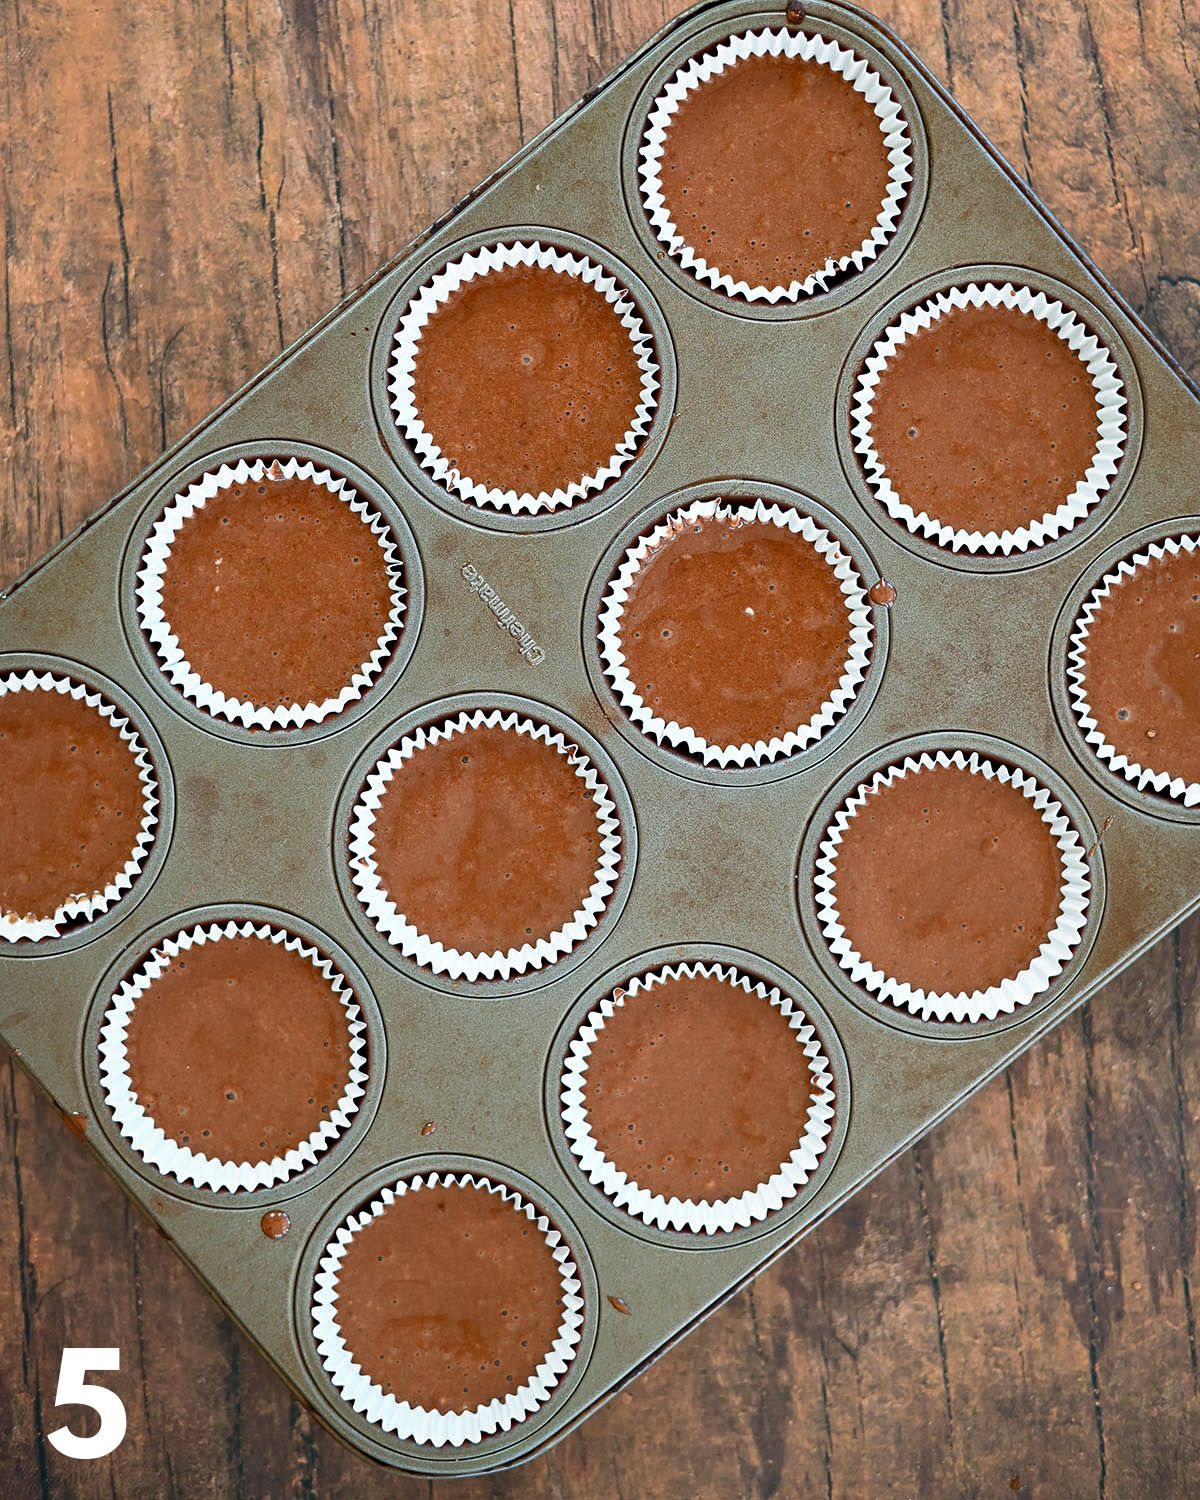 Chocolate cupcake batter pour into a muffin tin.